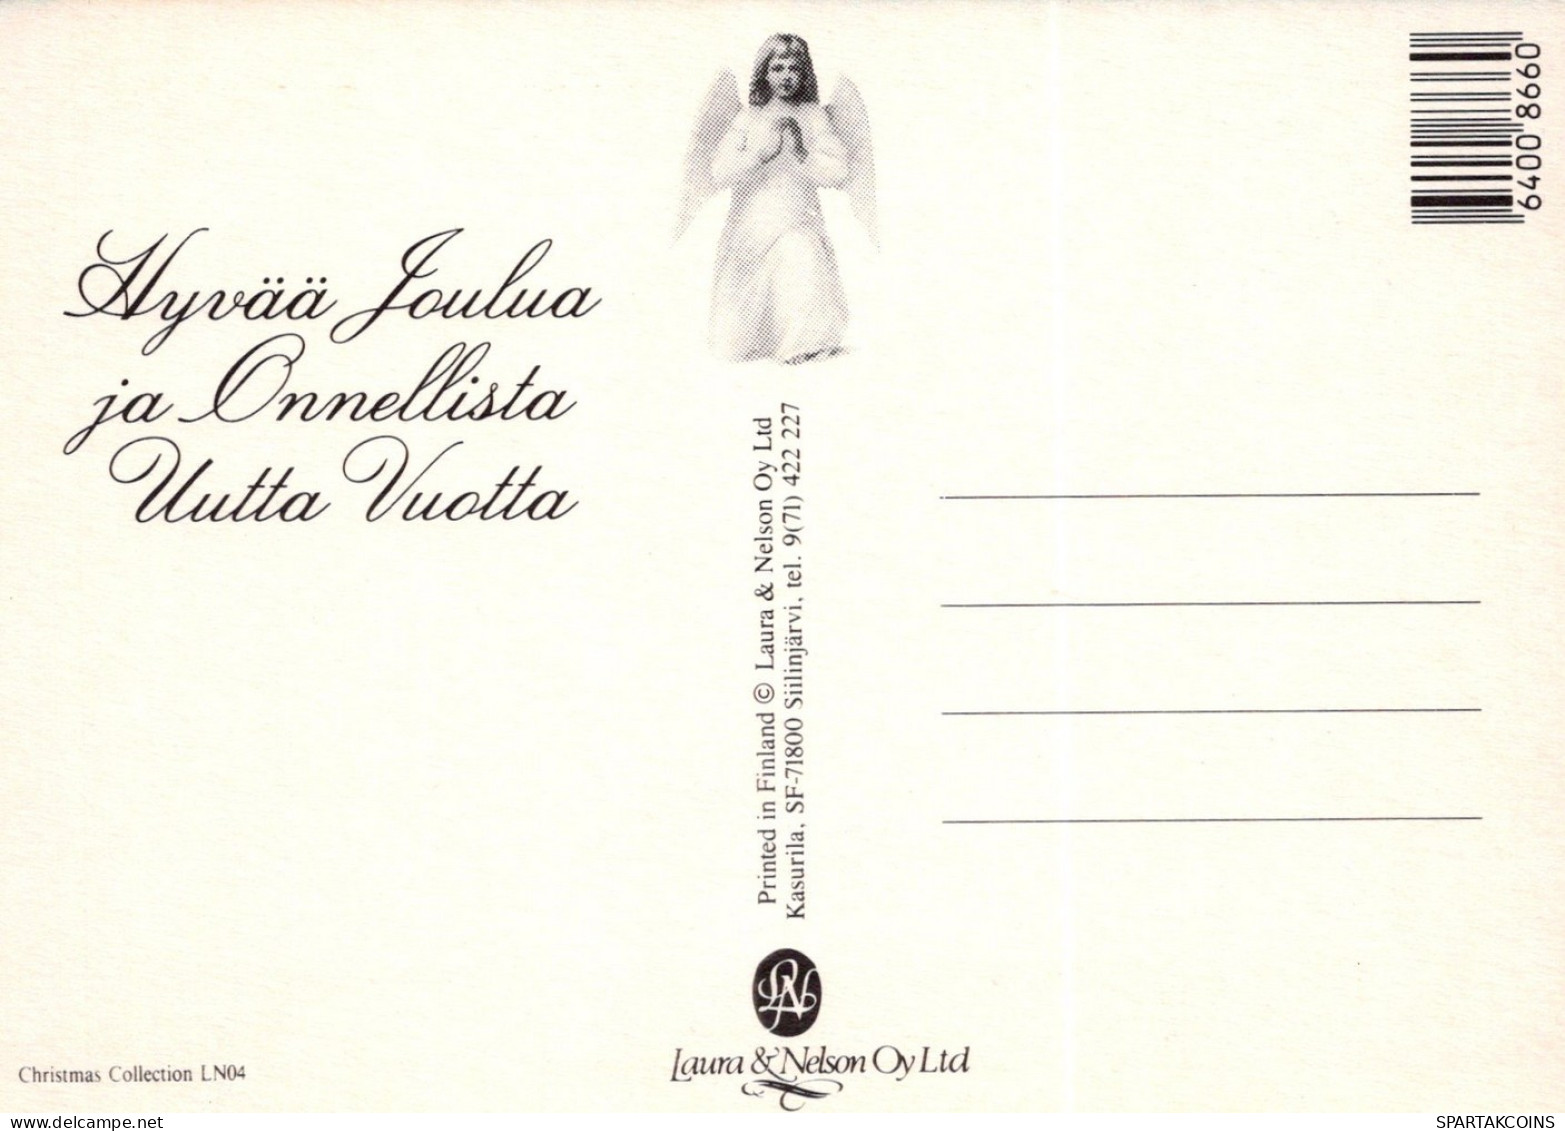 ANGELO Buon Anno Natale Vintage Cartolina CPSM #PAH859.IT - Angeles